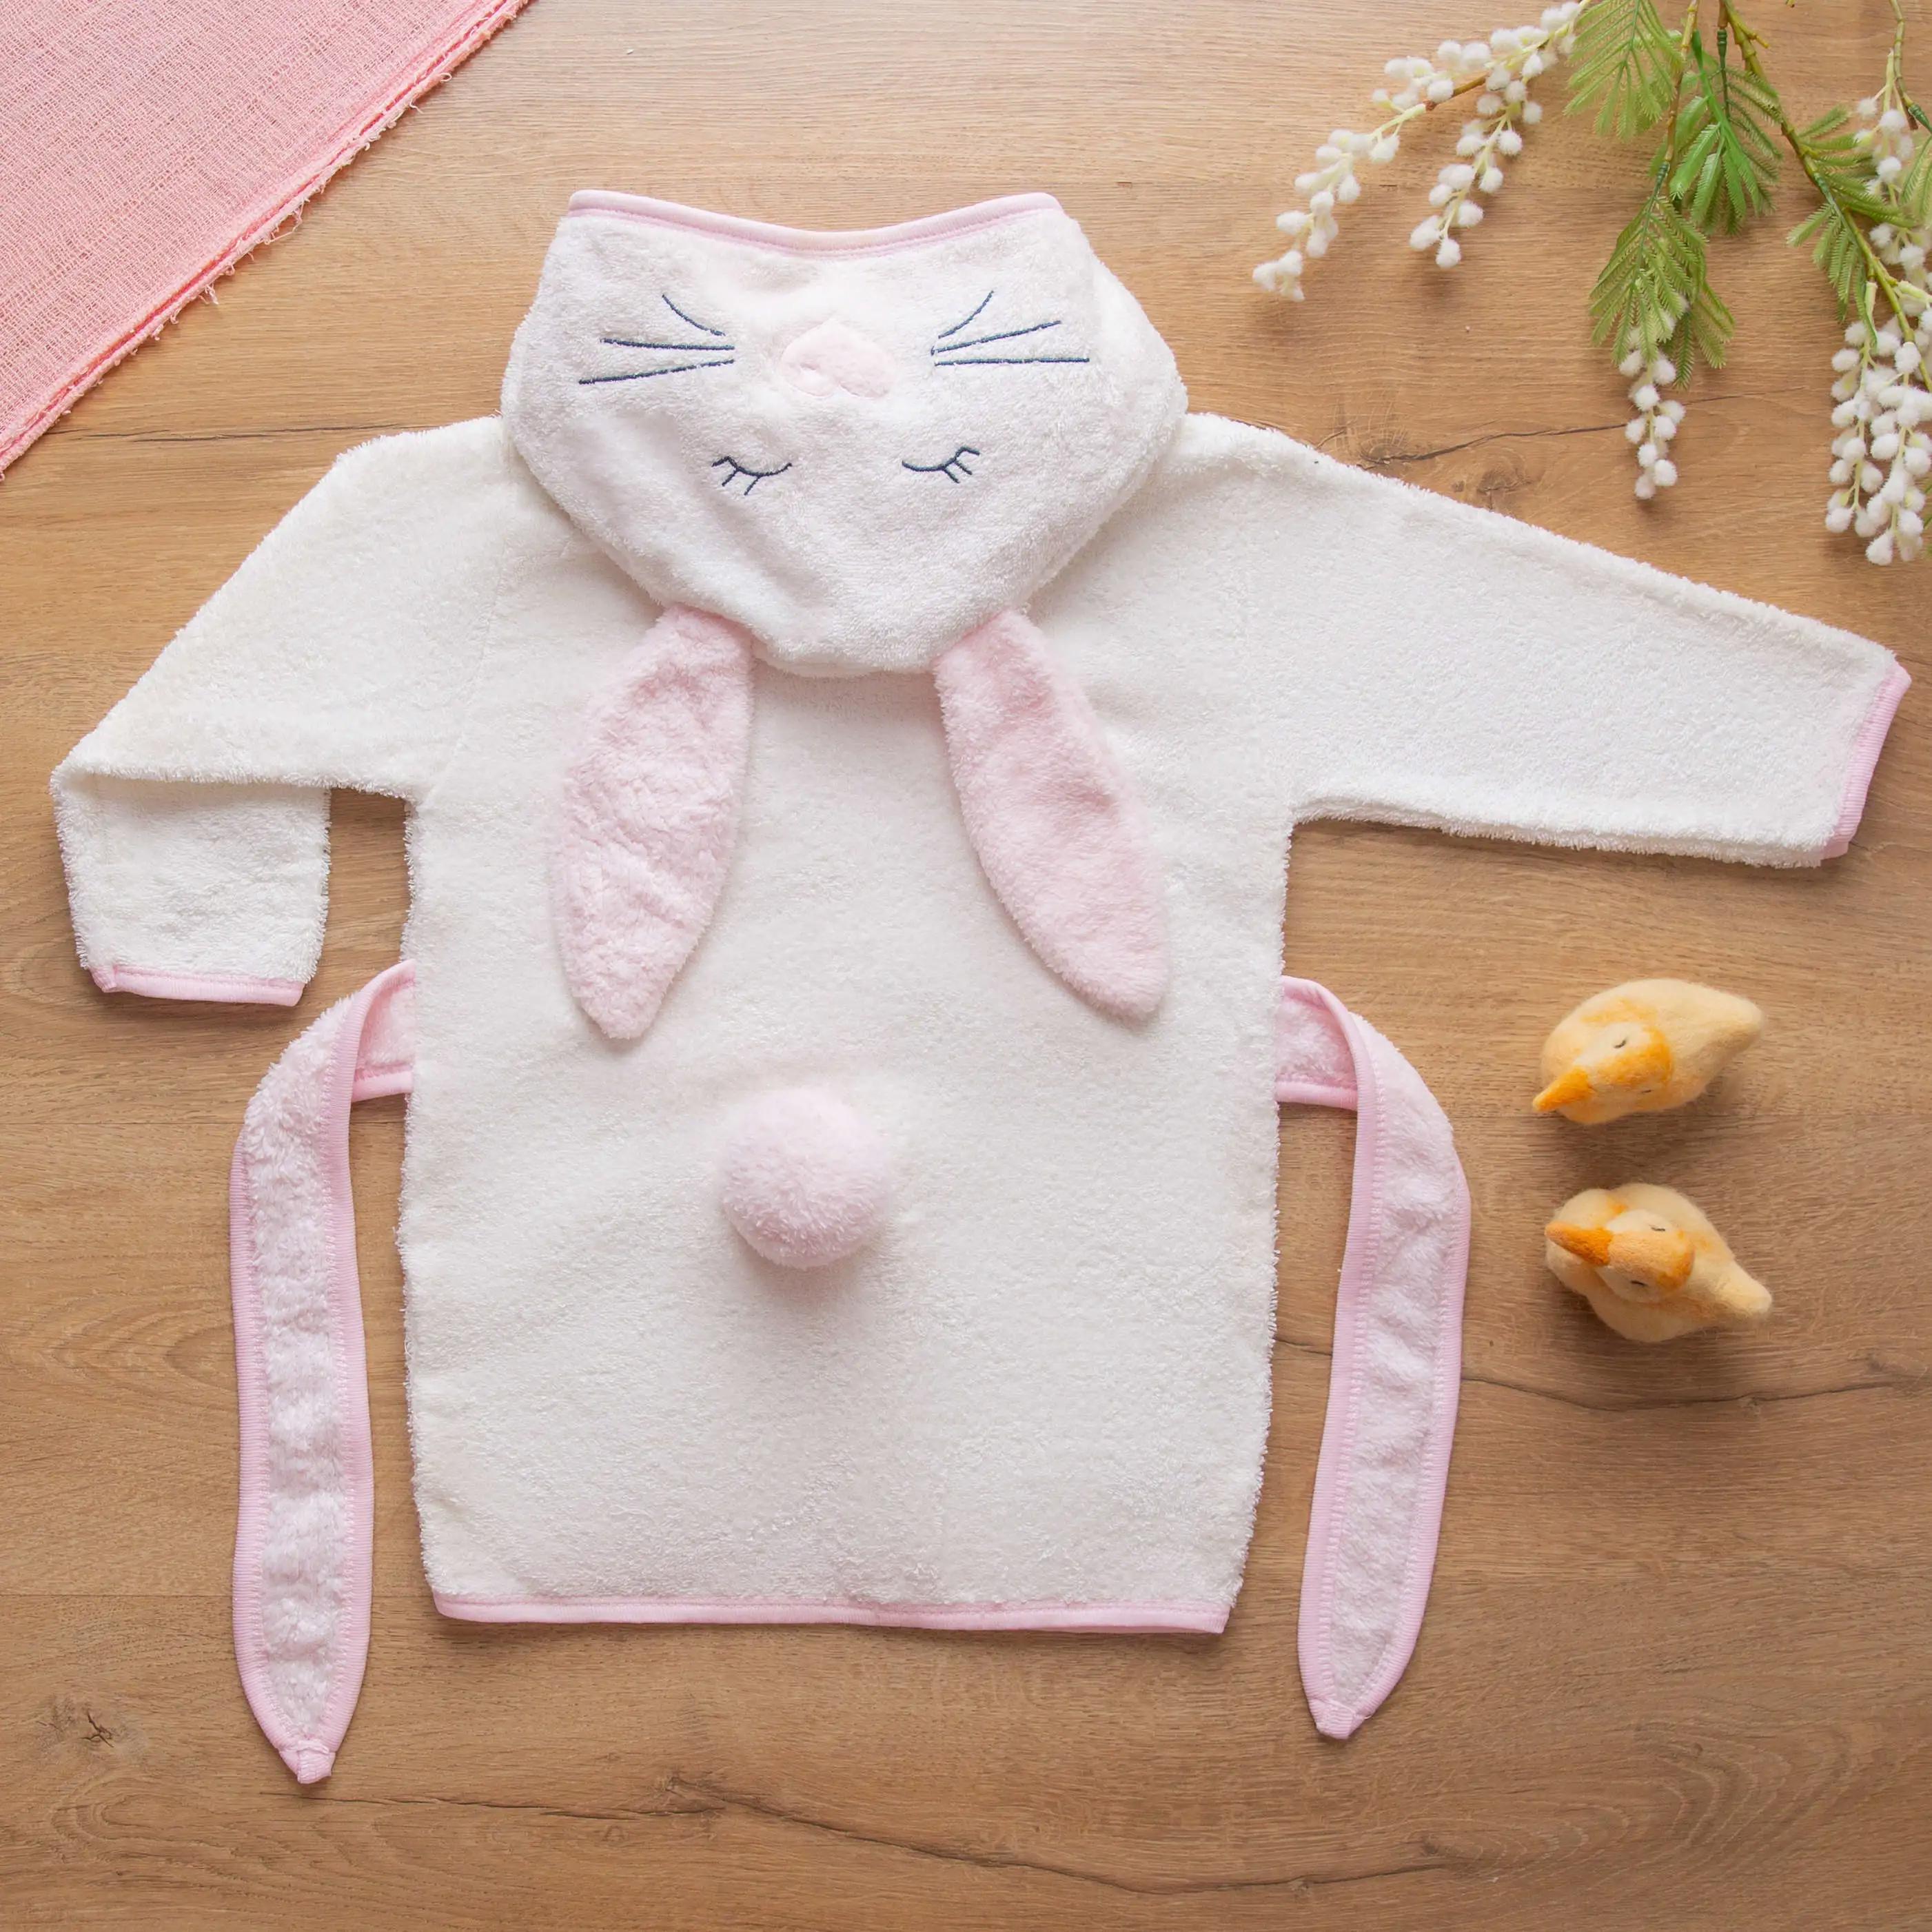 Sarebaby Love Serial Baby Bathrobe %100 Natural Cotton For 0-2 Age Pink